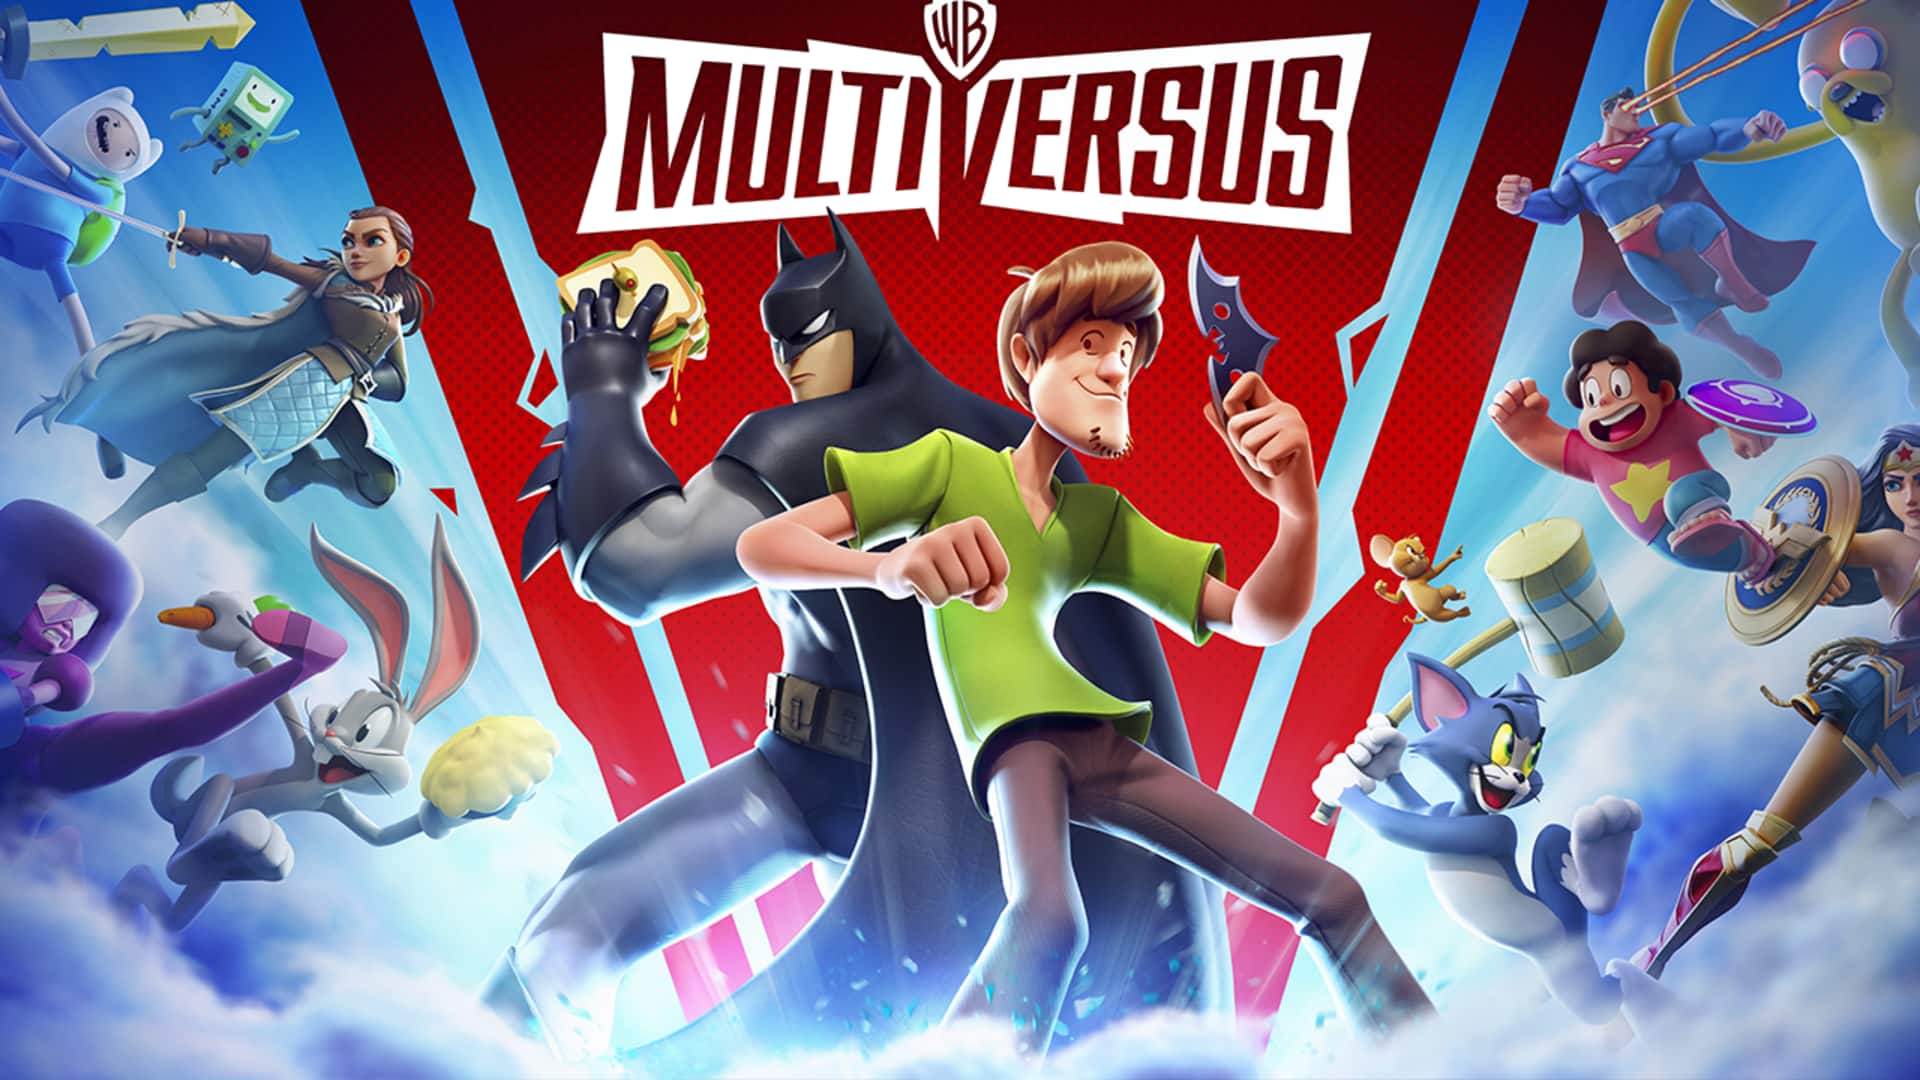 Warner Bros's MultiVersus fighter game is returning this May